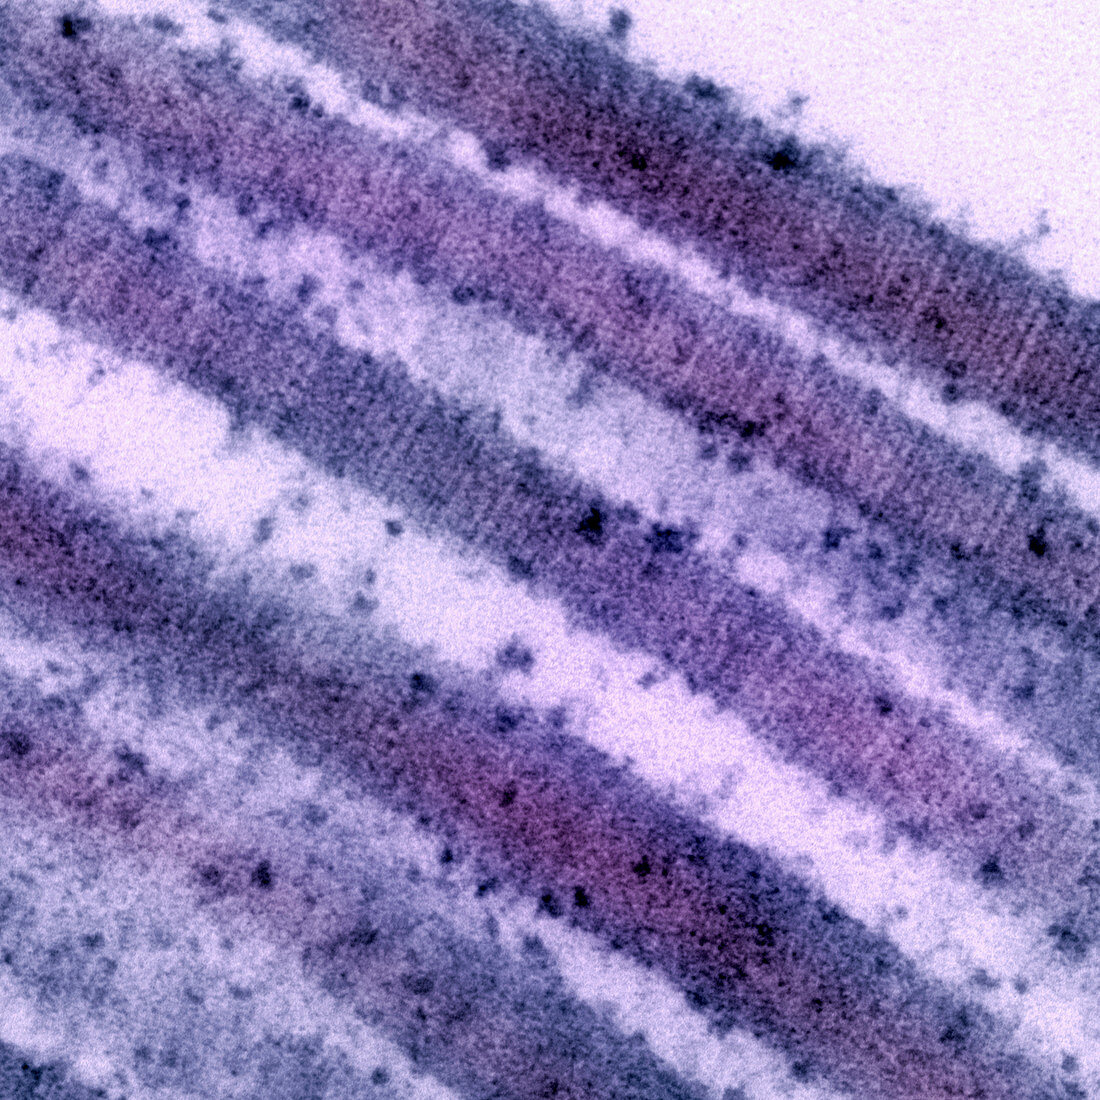 Mouse lung collagen. TEM